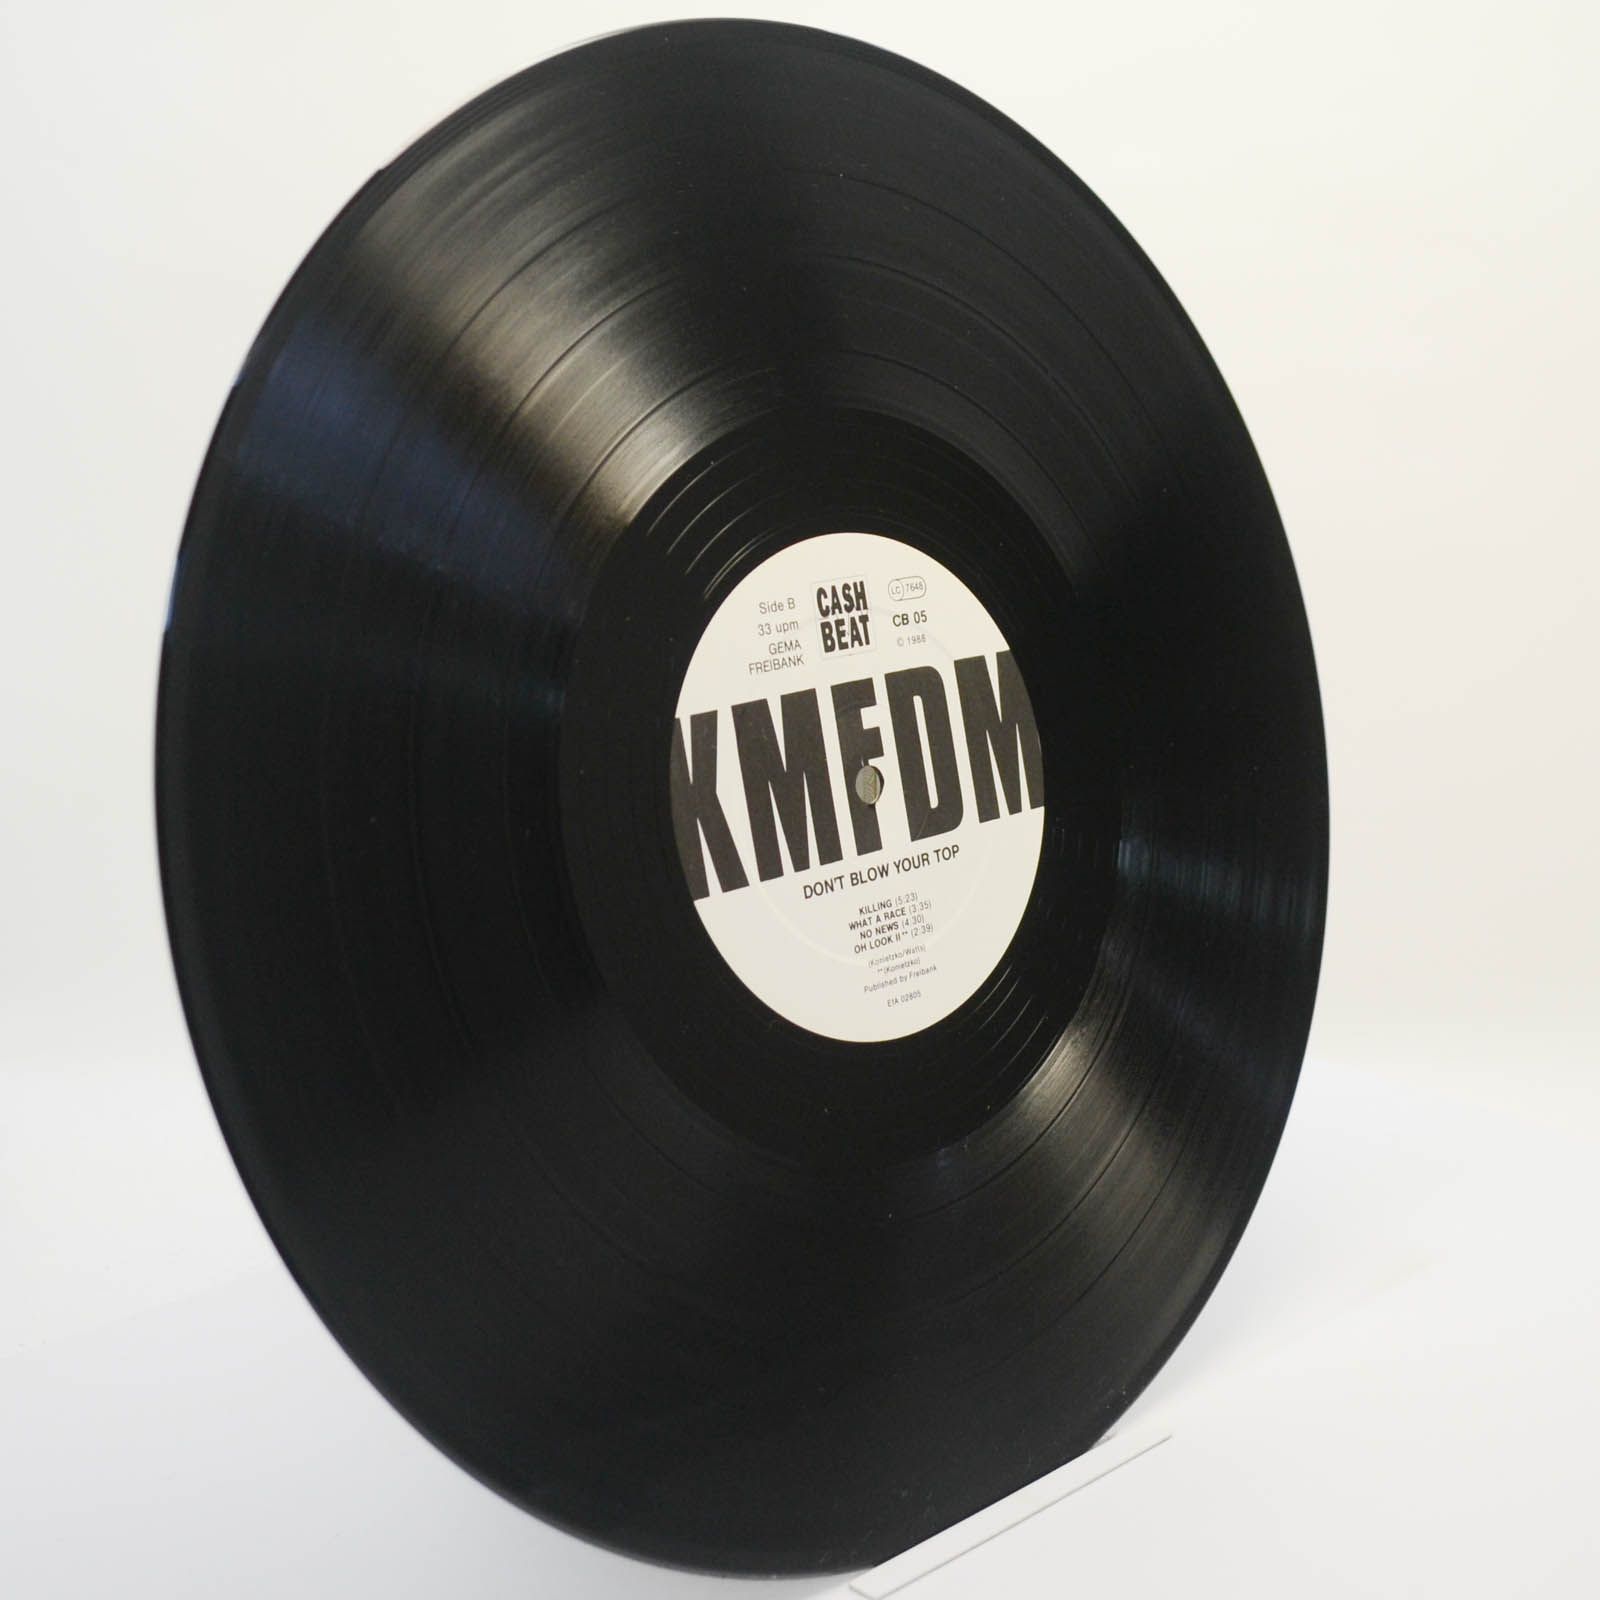 KMFDM — Don't Blow Your Top, 1988